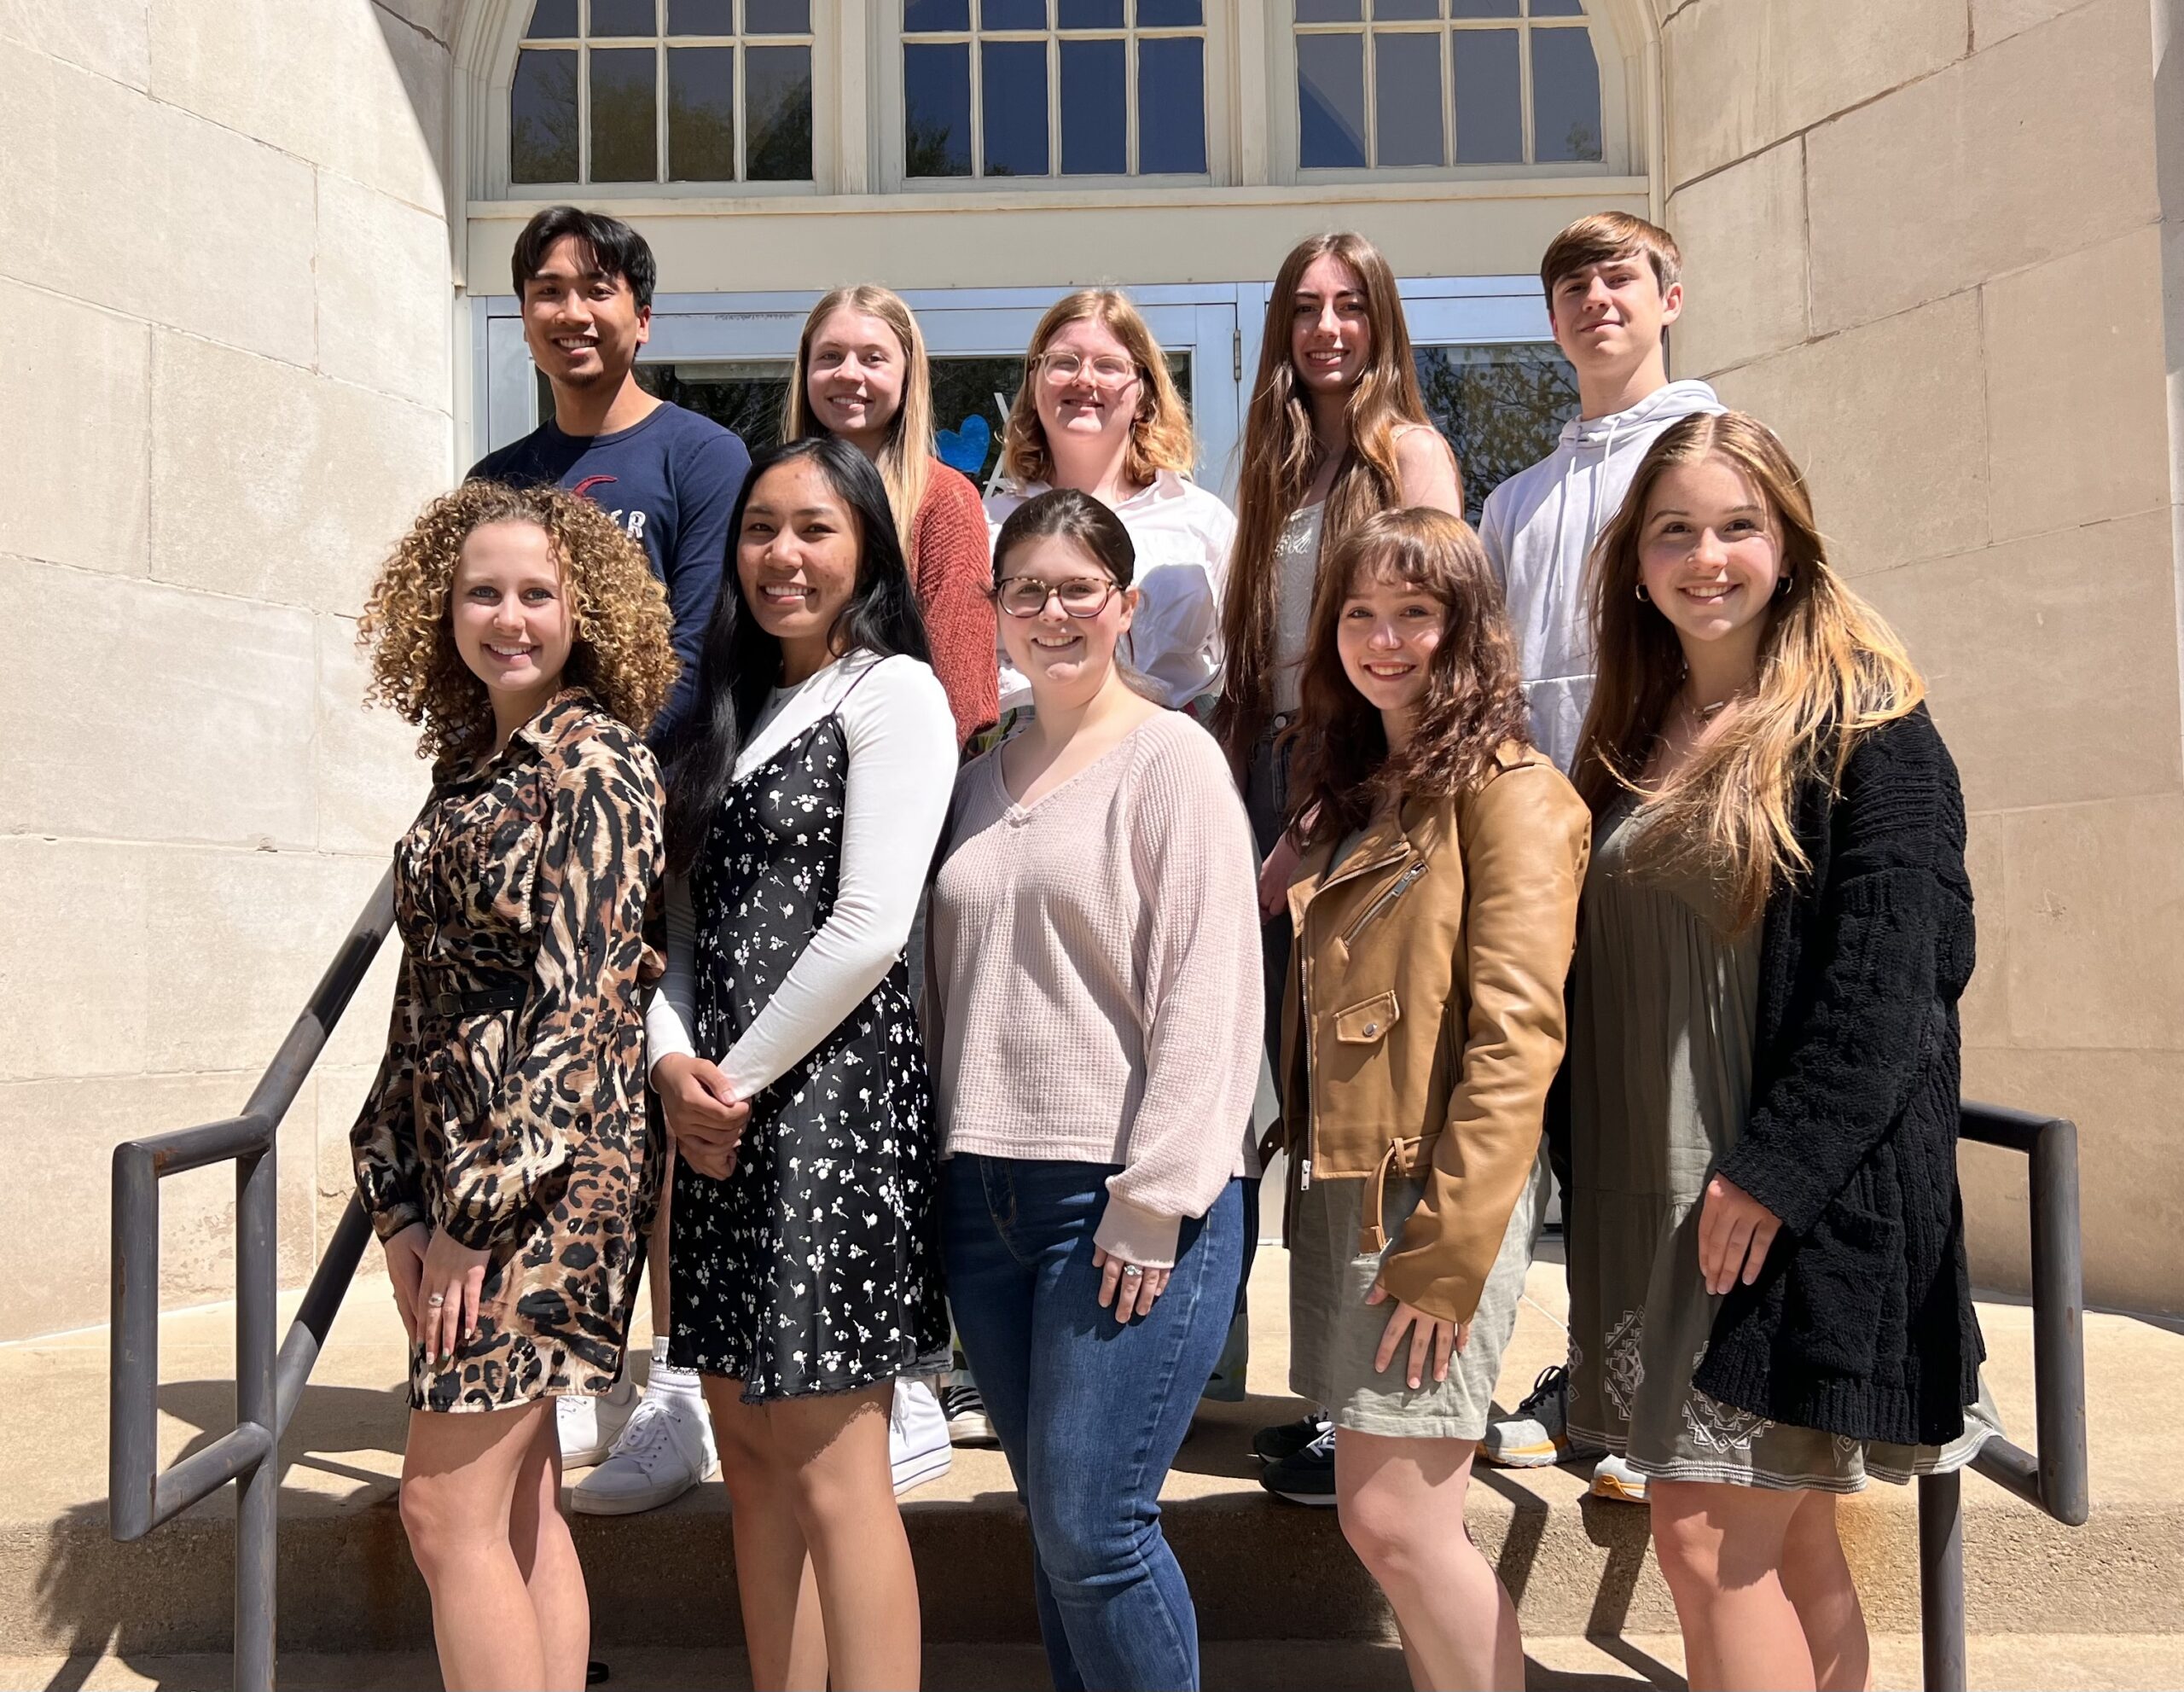 Front row (left to right): Sadie Thornton, Veronica Tirao, Isabella Whitfield, Alexia Bouslog (Salutatorian), Claire Grey.</p>
<p>Back row (left to right): Christian Rosario, Lily Keutzer, Kailey Patterson (Valedictorian), Allie Leone, Robert Nelson.